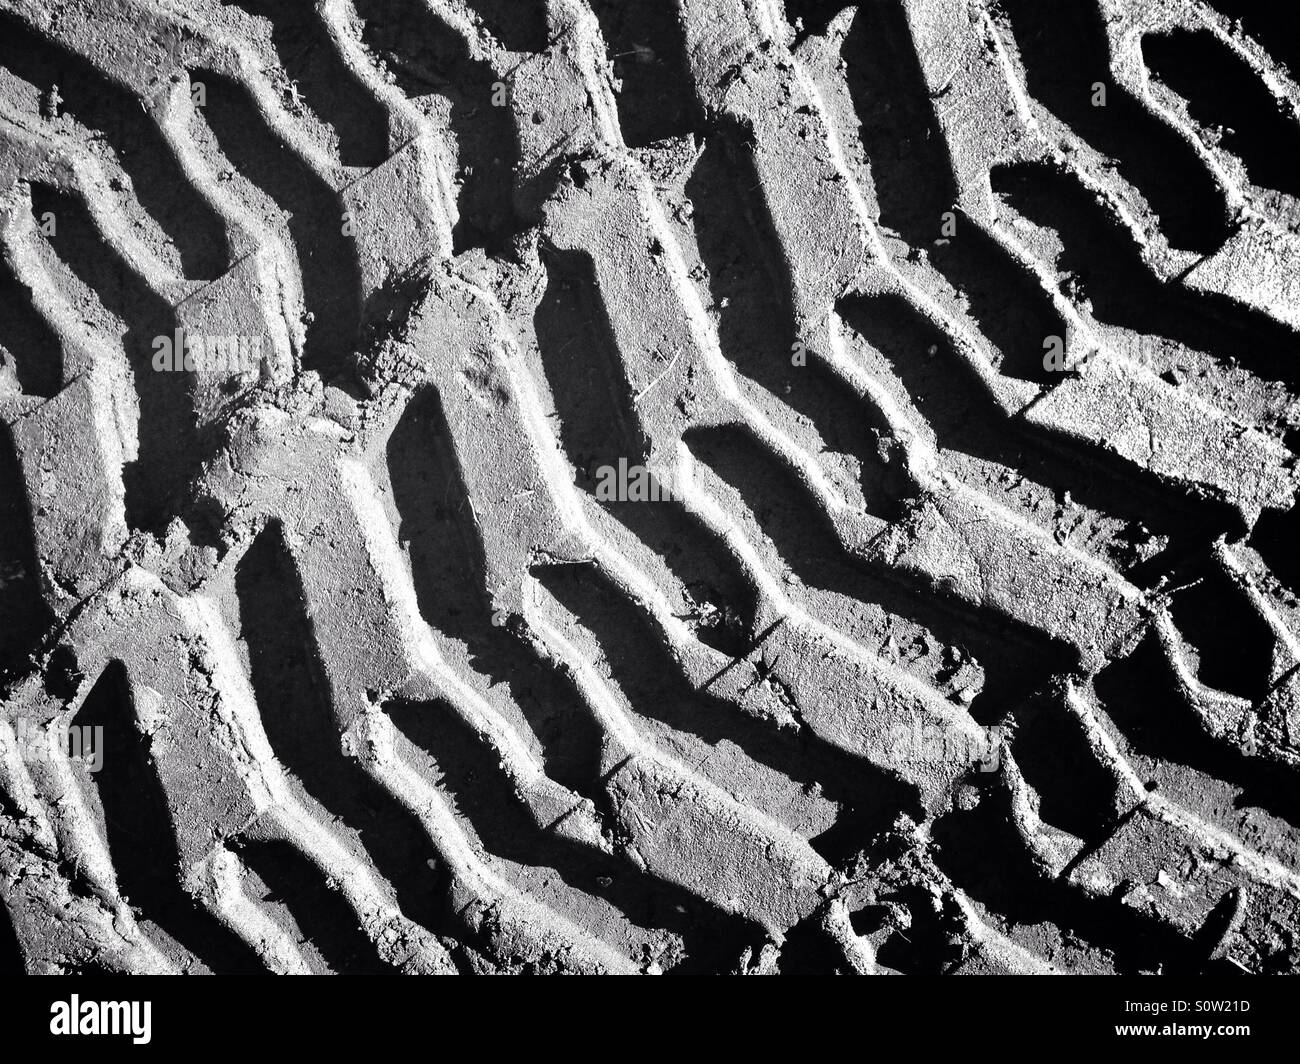 Pattern in the mud created by caterpillar tracks Stock Photo